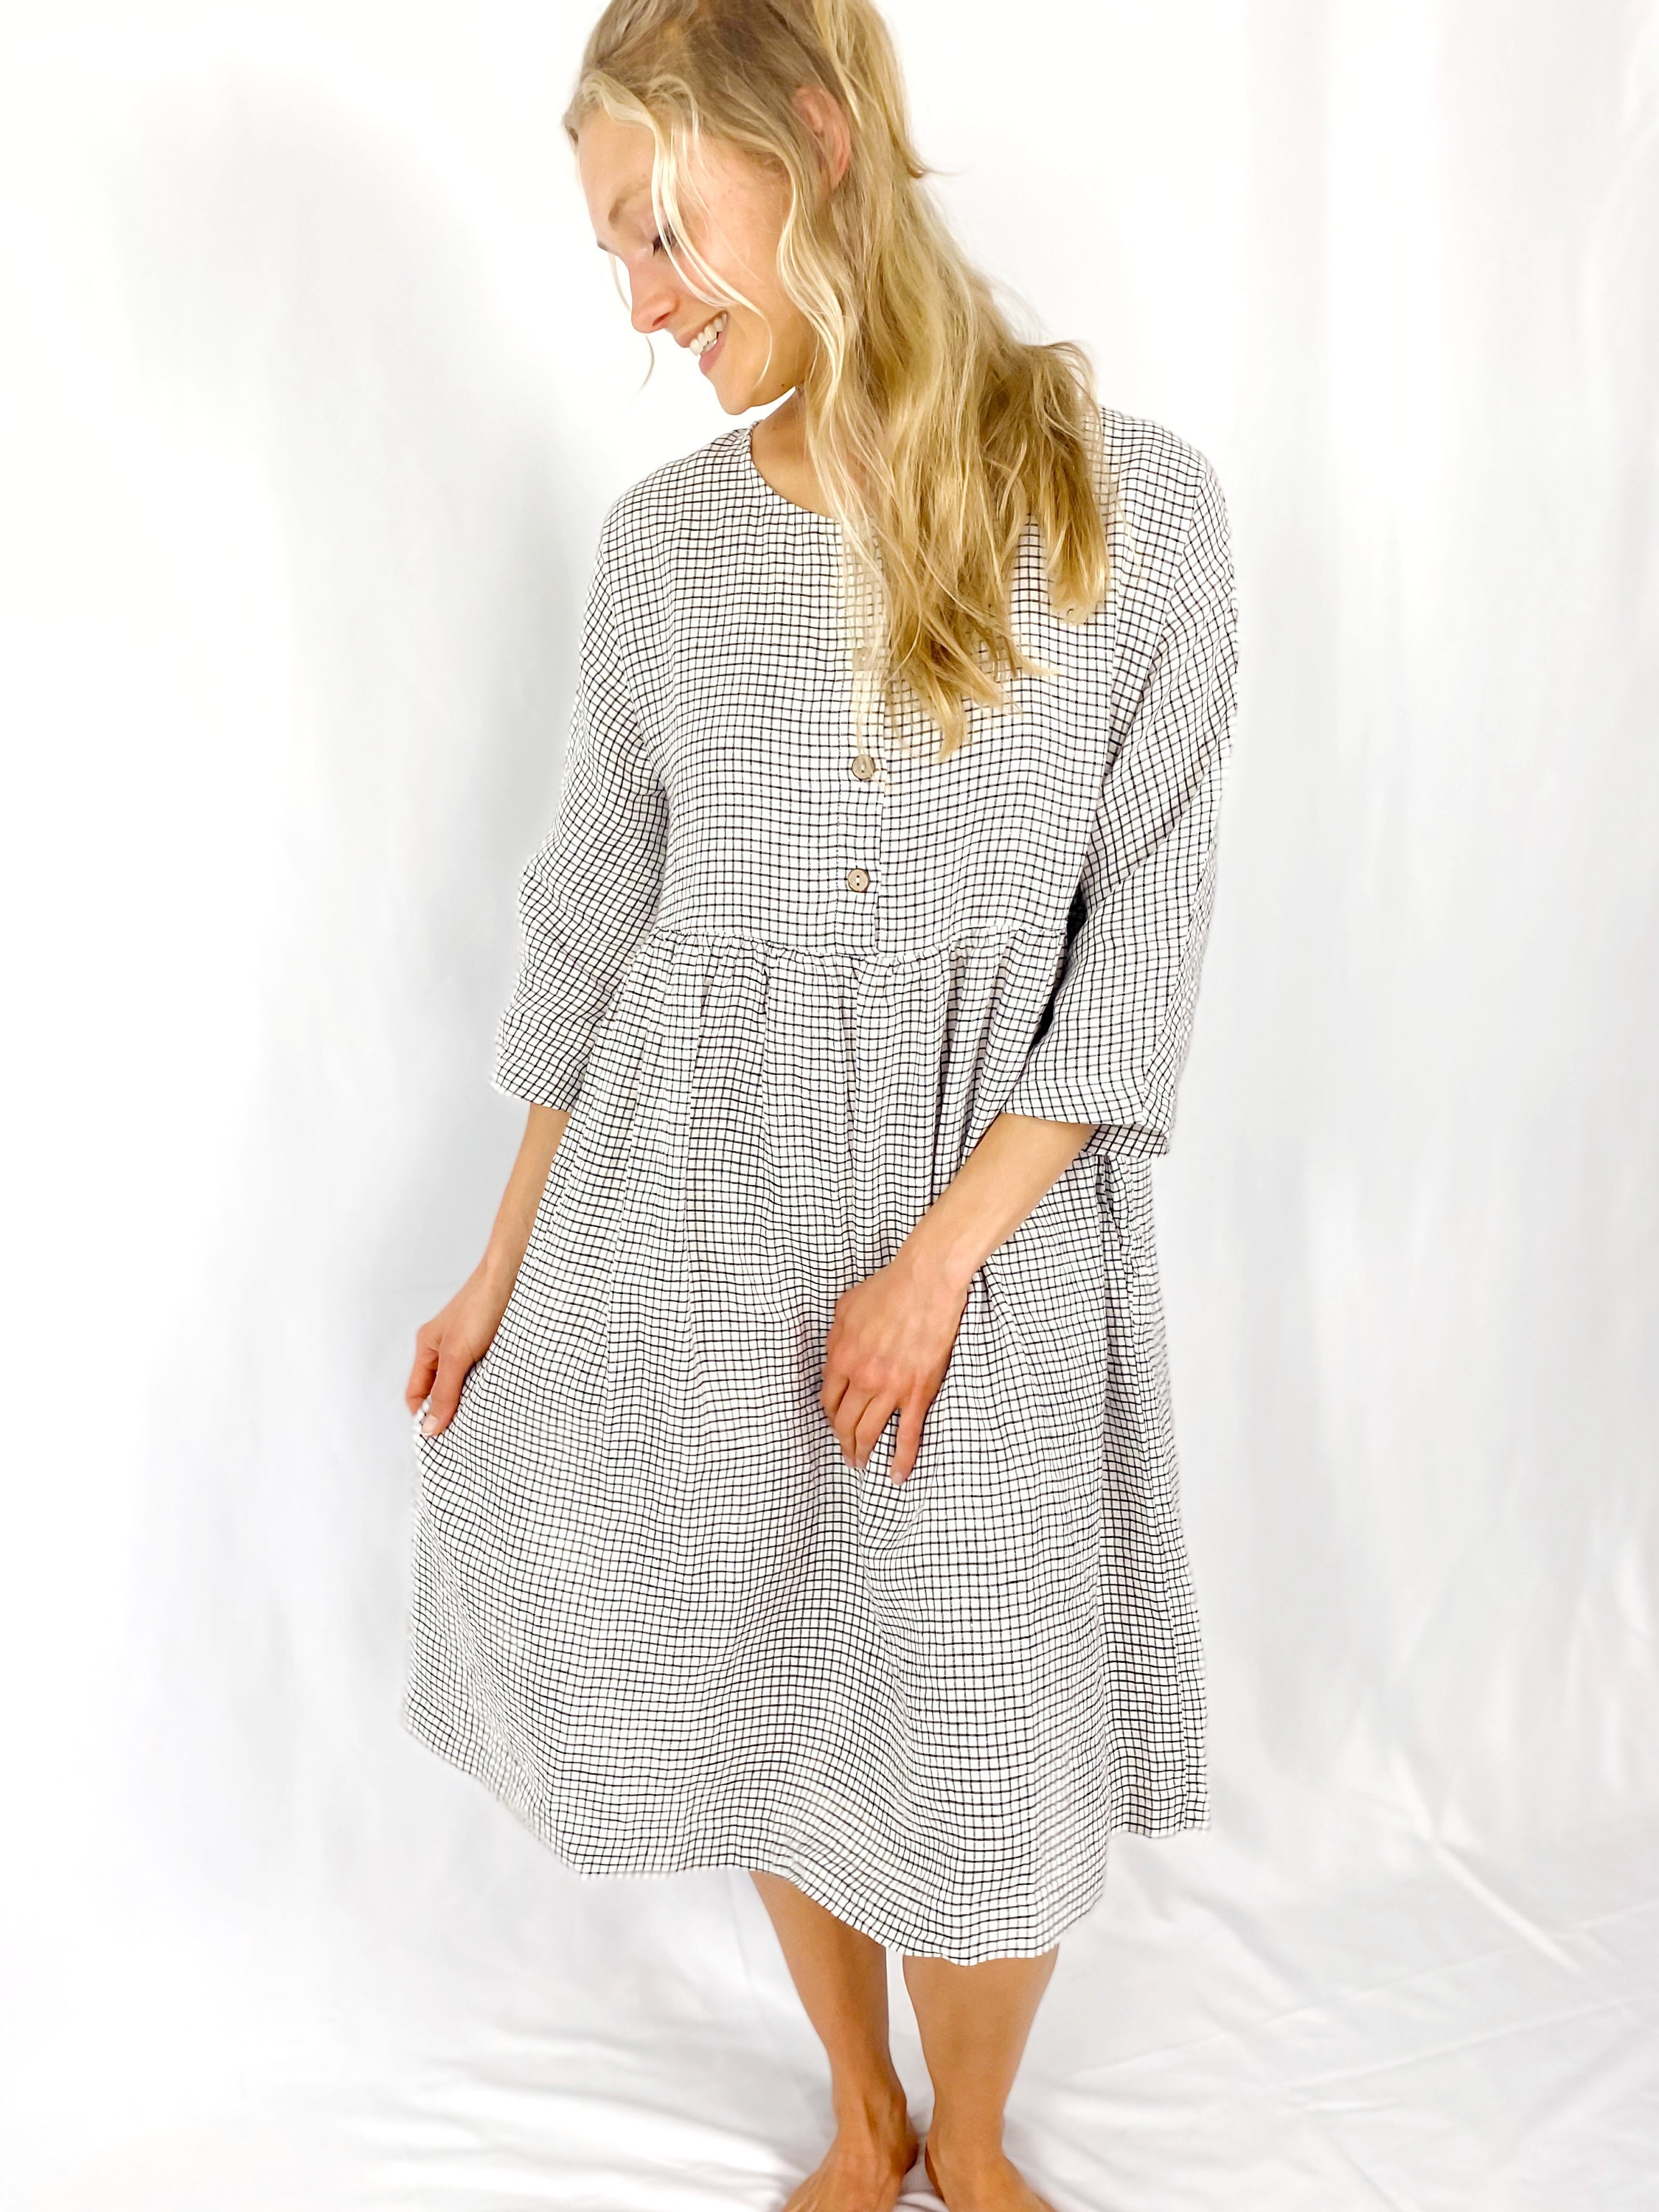 Linen dress with long sleeves and hidden side pockets, San Clemente ...